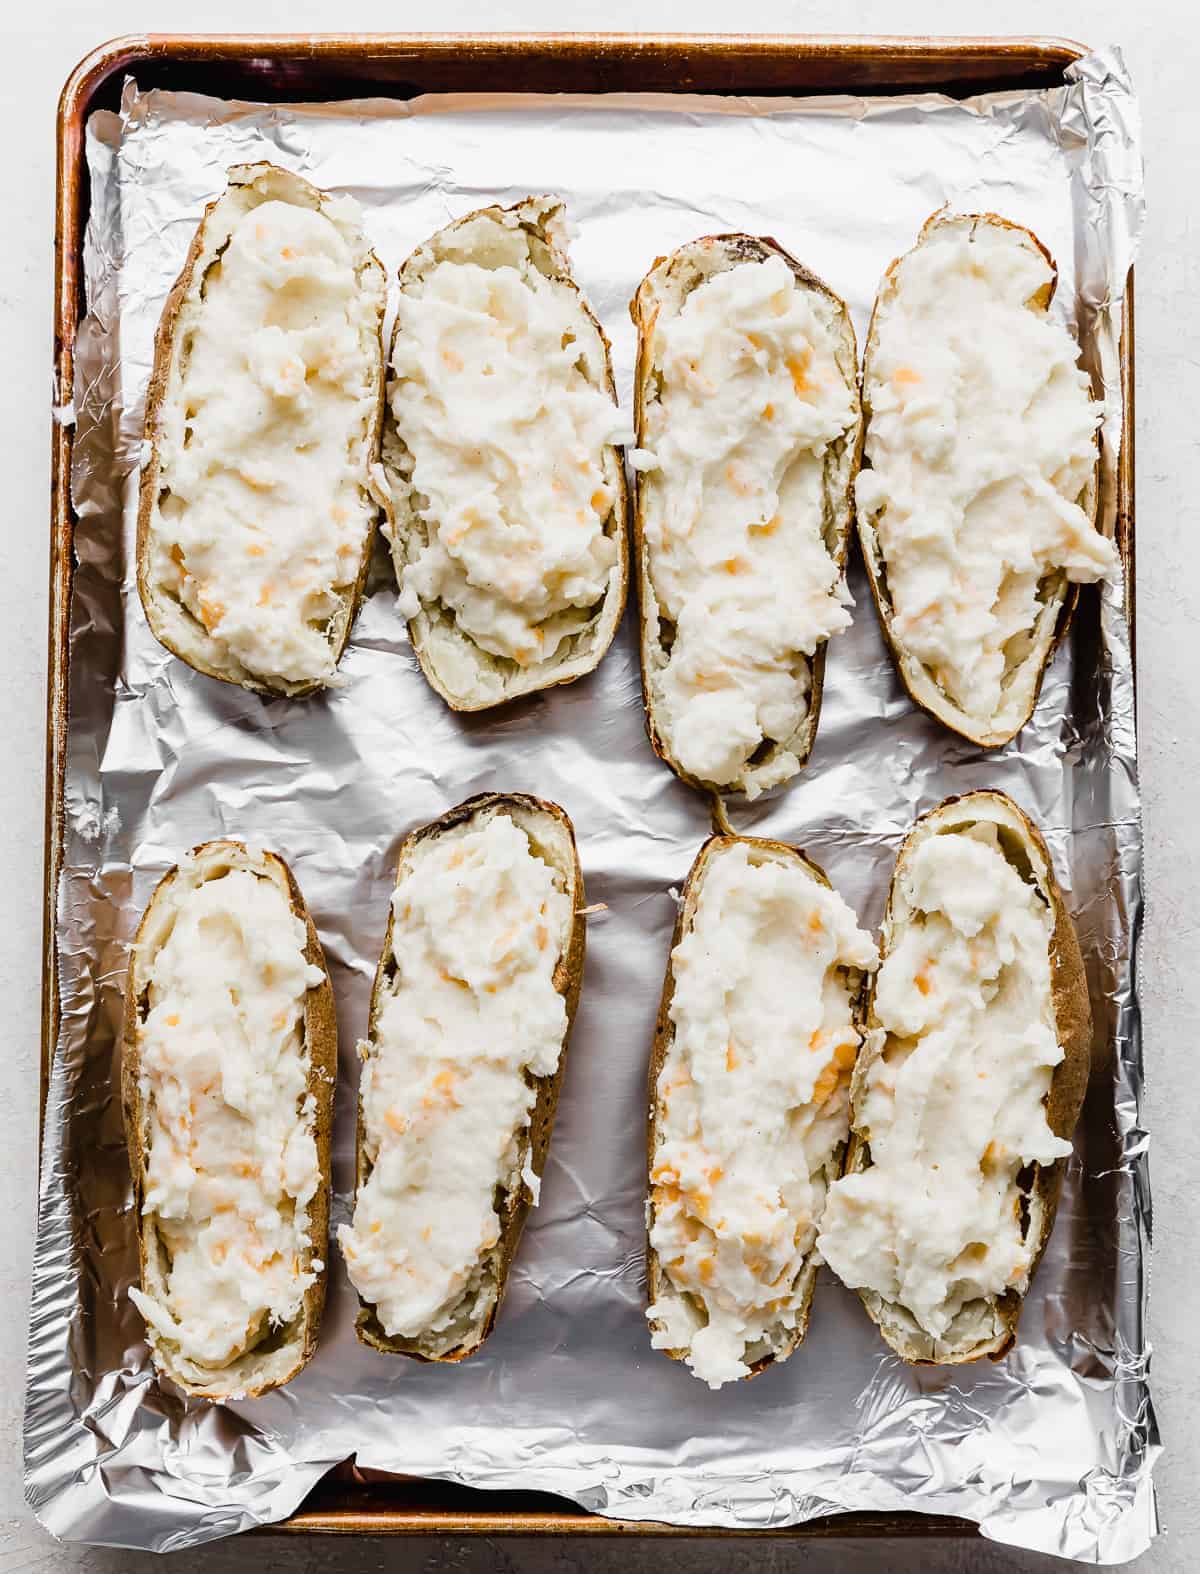 Potato skins filled with Twice Baked Potatoes with Cream Cheese mixture.